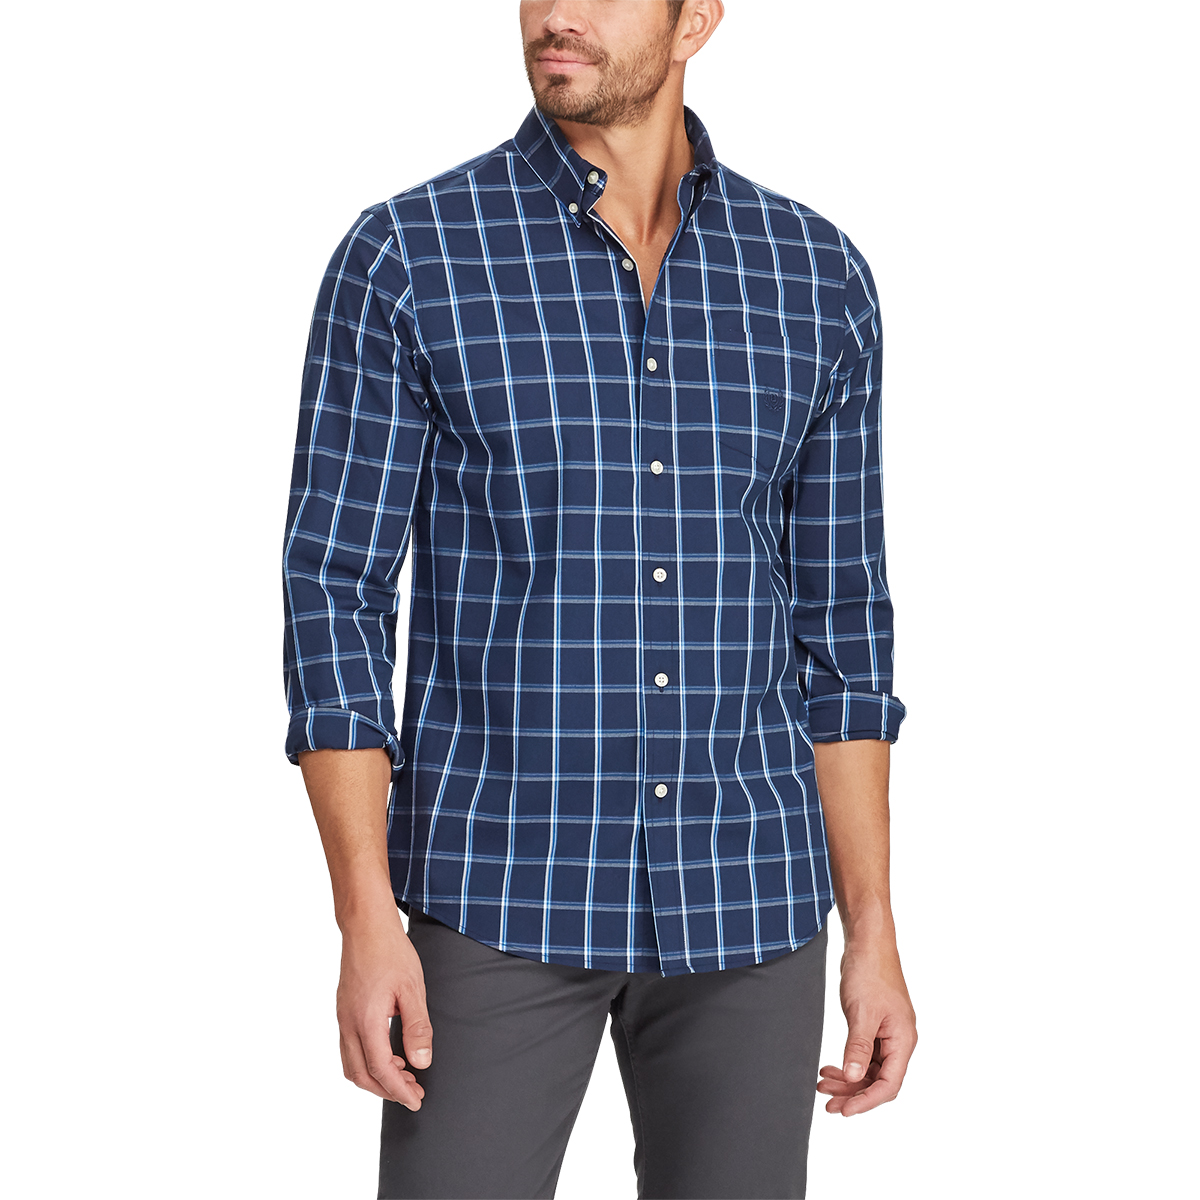 Chaps Men's Easy Care Stretch Button-Down Shirt - Various Patterns, M